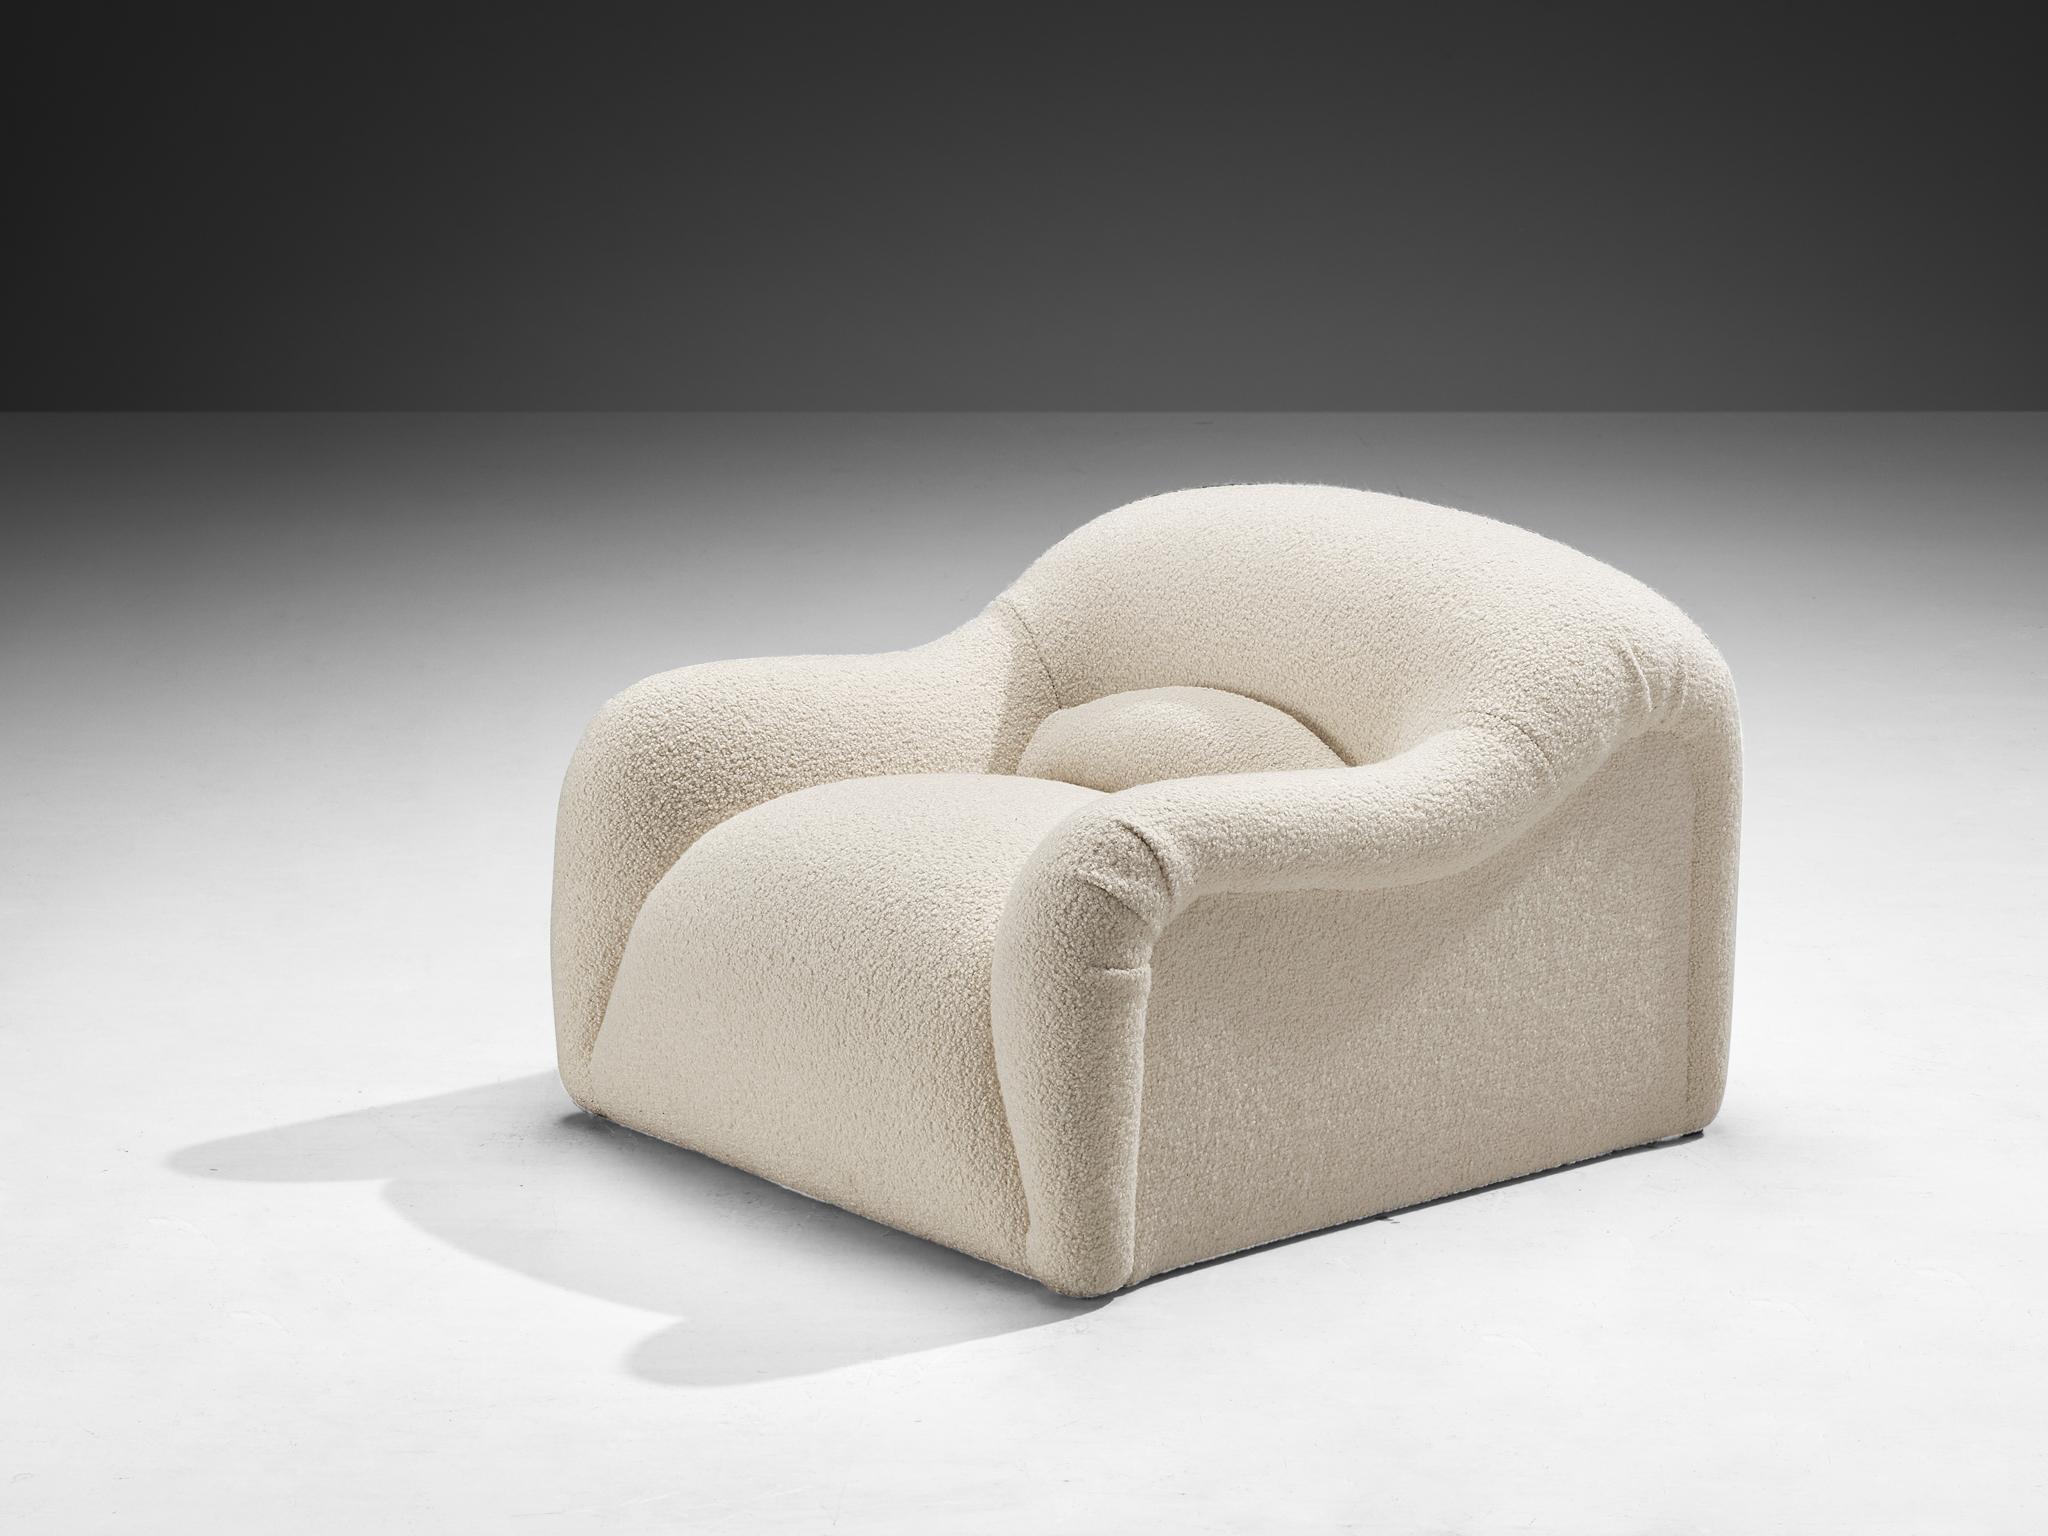 Emilio Guarnacci for 1P, 'Ecuba' lounge chair, acrylonitrile butadiene styrene, foam, bouclé, Italy, design 1969 

Stunning lounge chair by Italian designer Emilio Guarnacci. The design forms a beautiful and organic appearing whole in a soft white